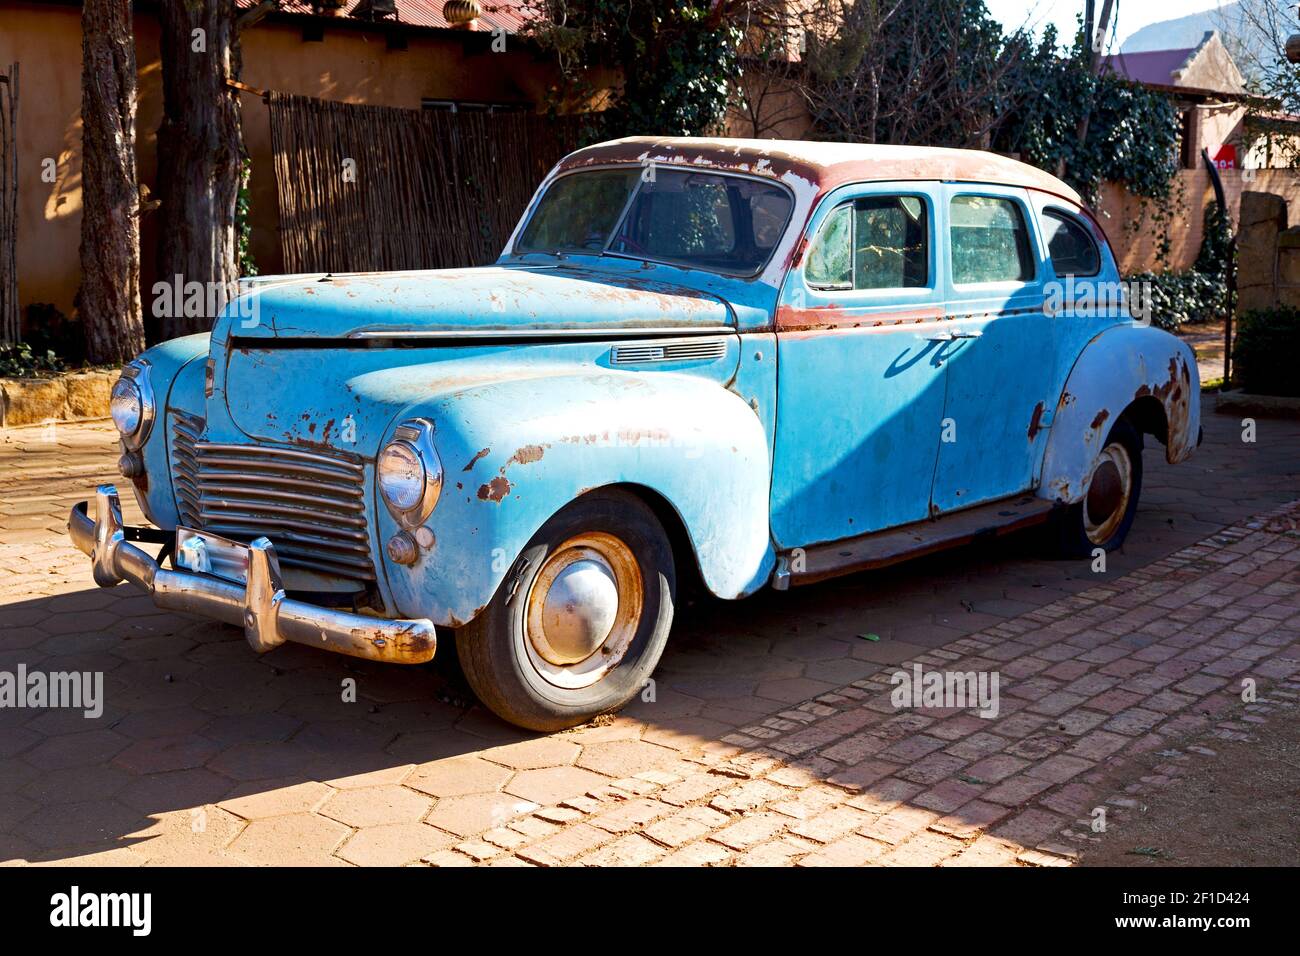 In south africa old abandoned   vintage car Stock Photo